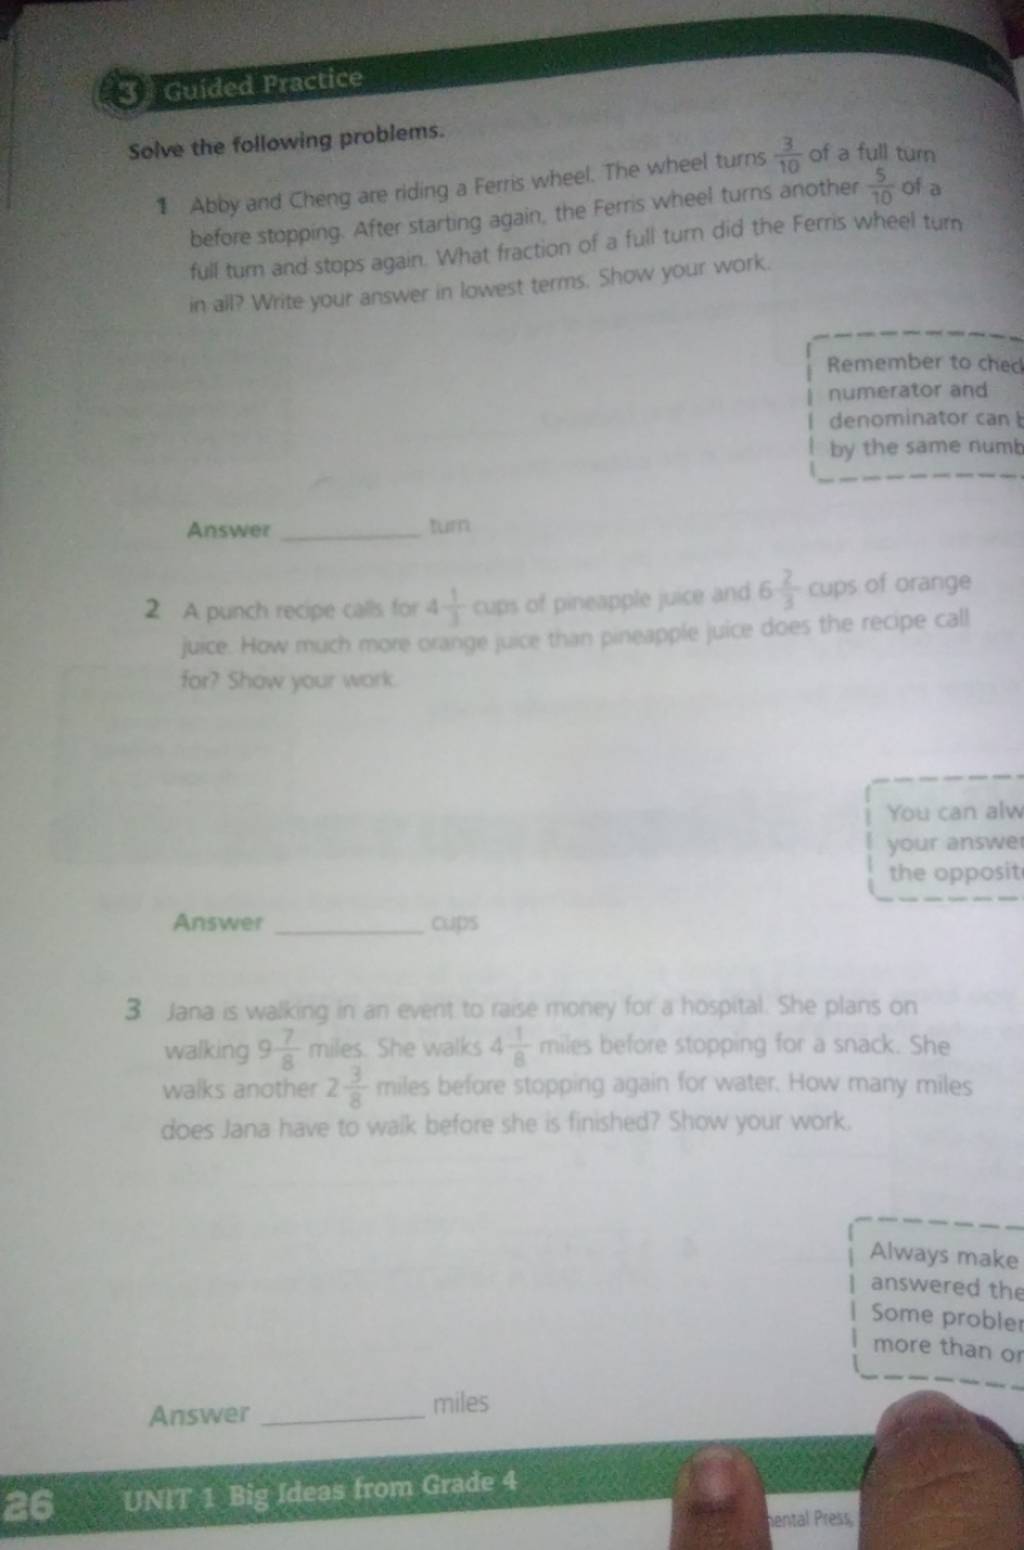 Guided Practice
Solve the following problems.
1 Abby and Cheng are rid